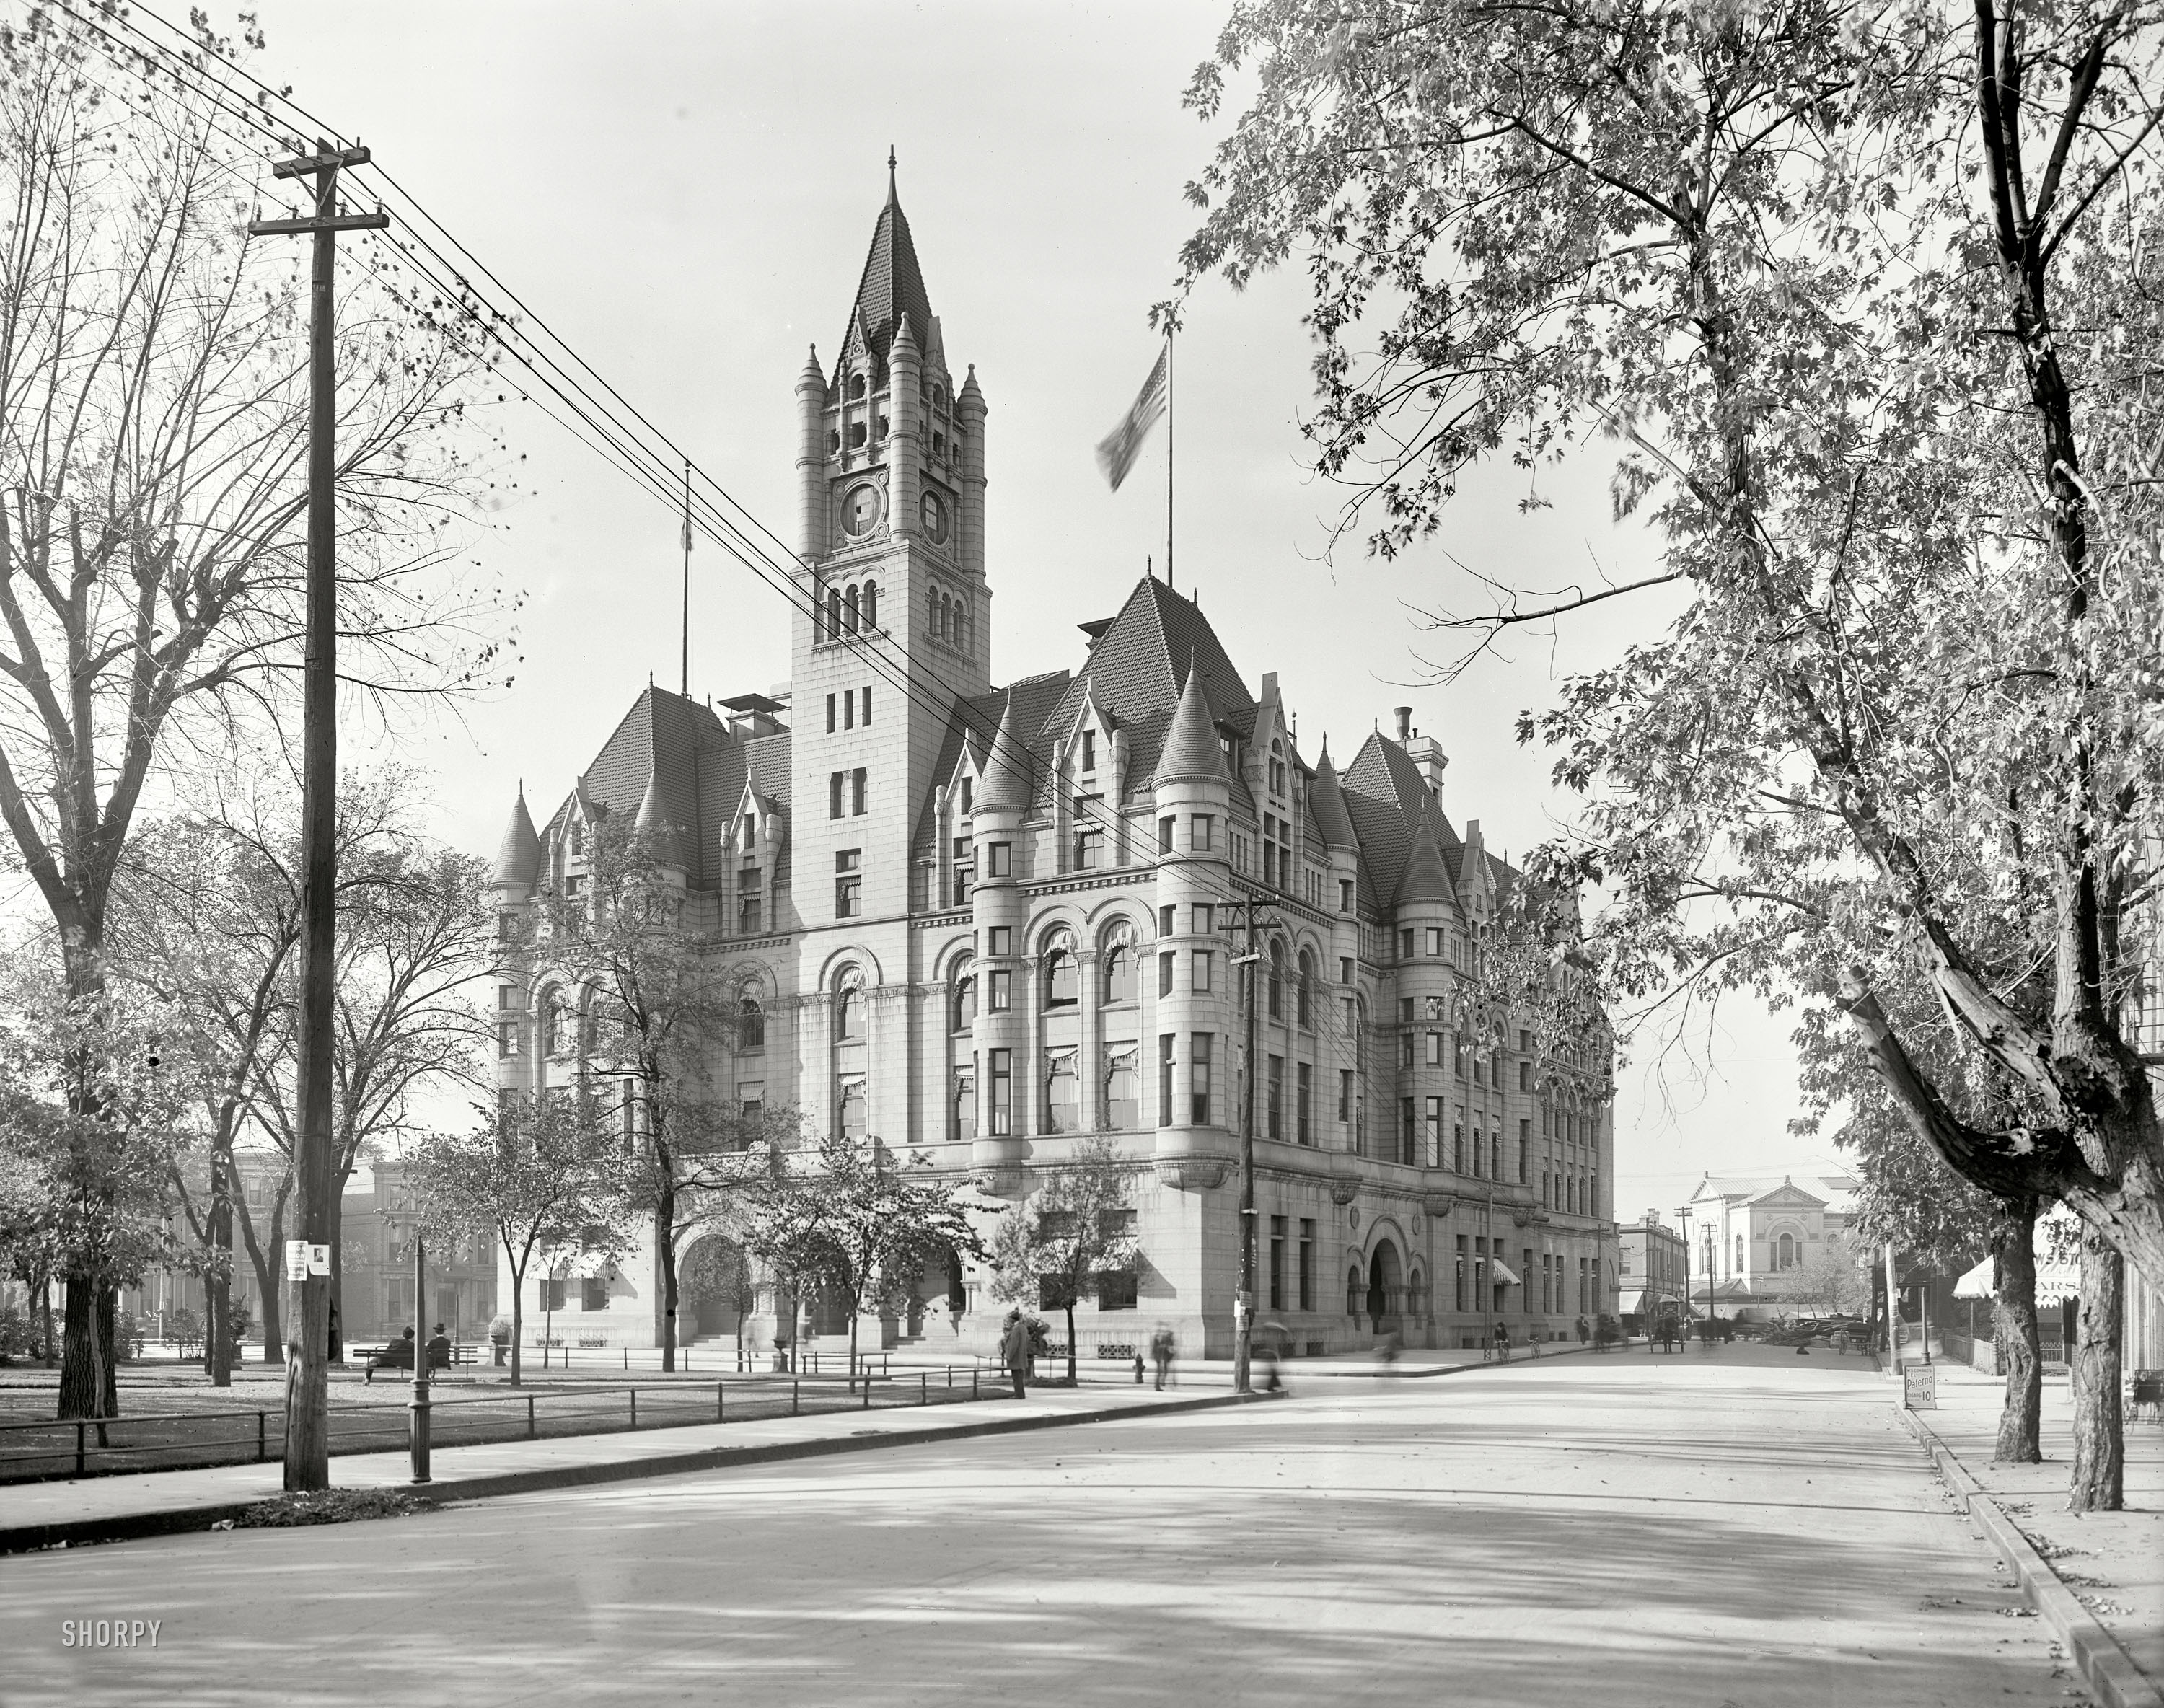 Circa 1902. "Post office at St. Paul, Minnesota." 8x10 inch dry plate glass negative by William Henry Jackson, Detroit Publishing Company. View full size.